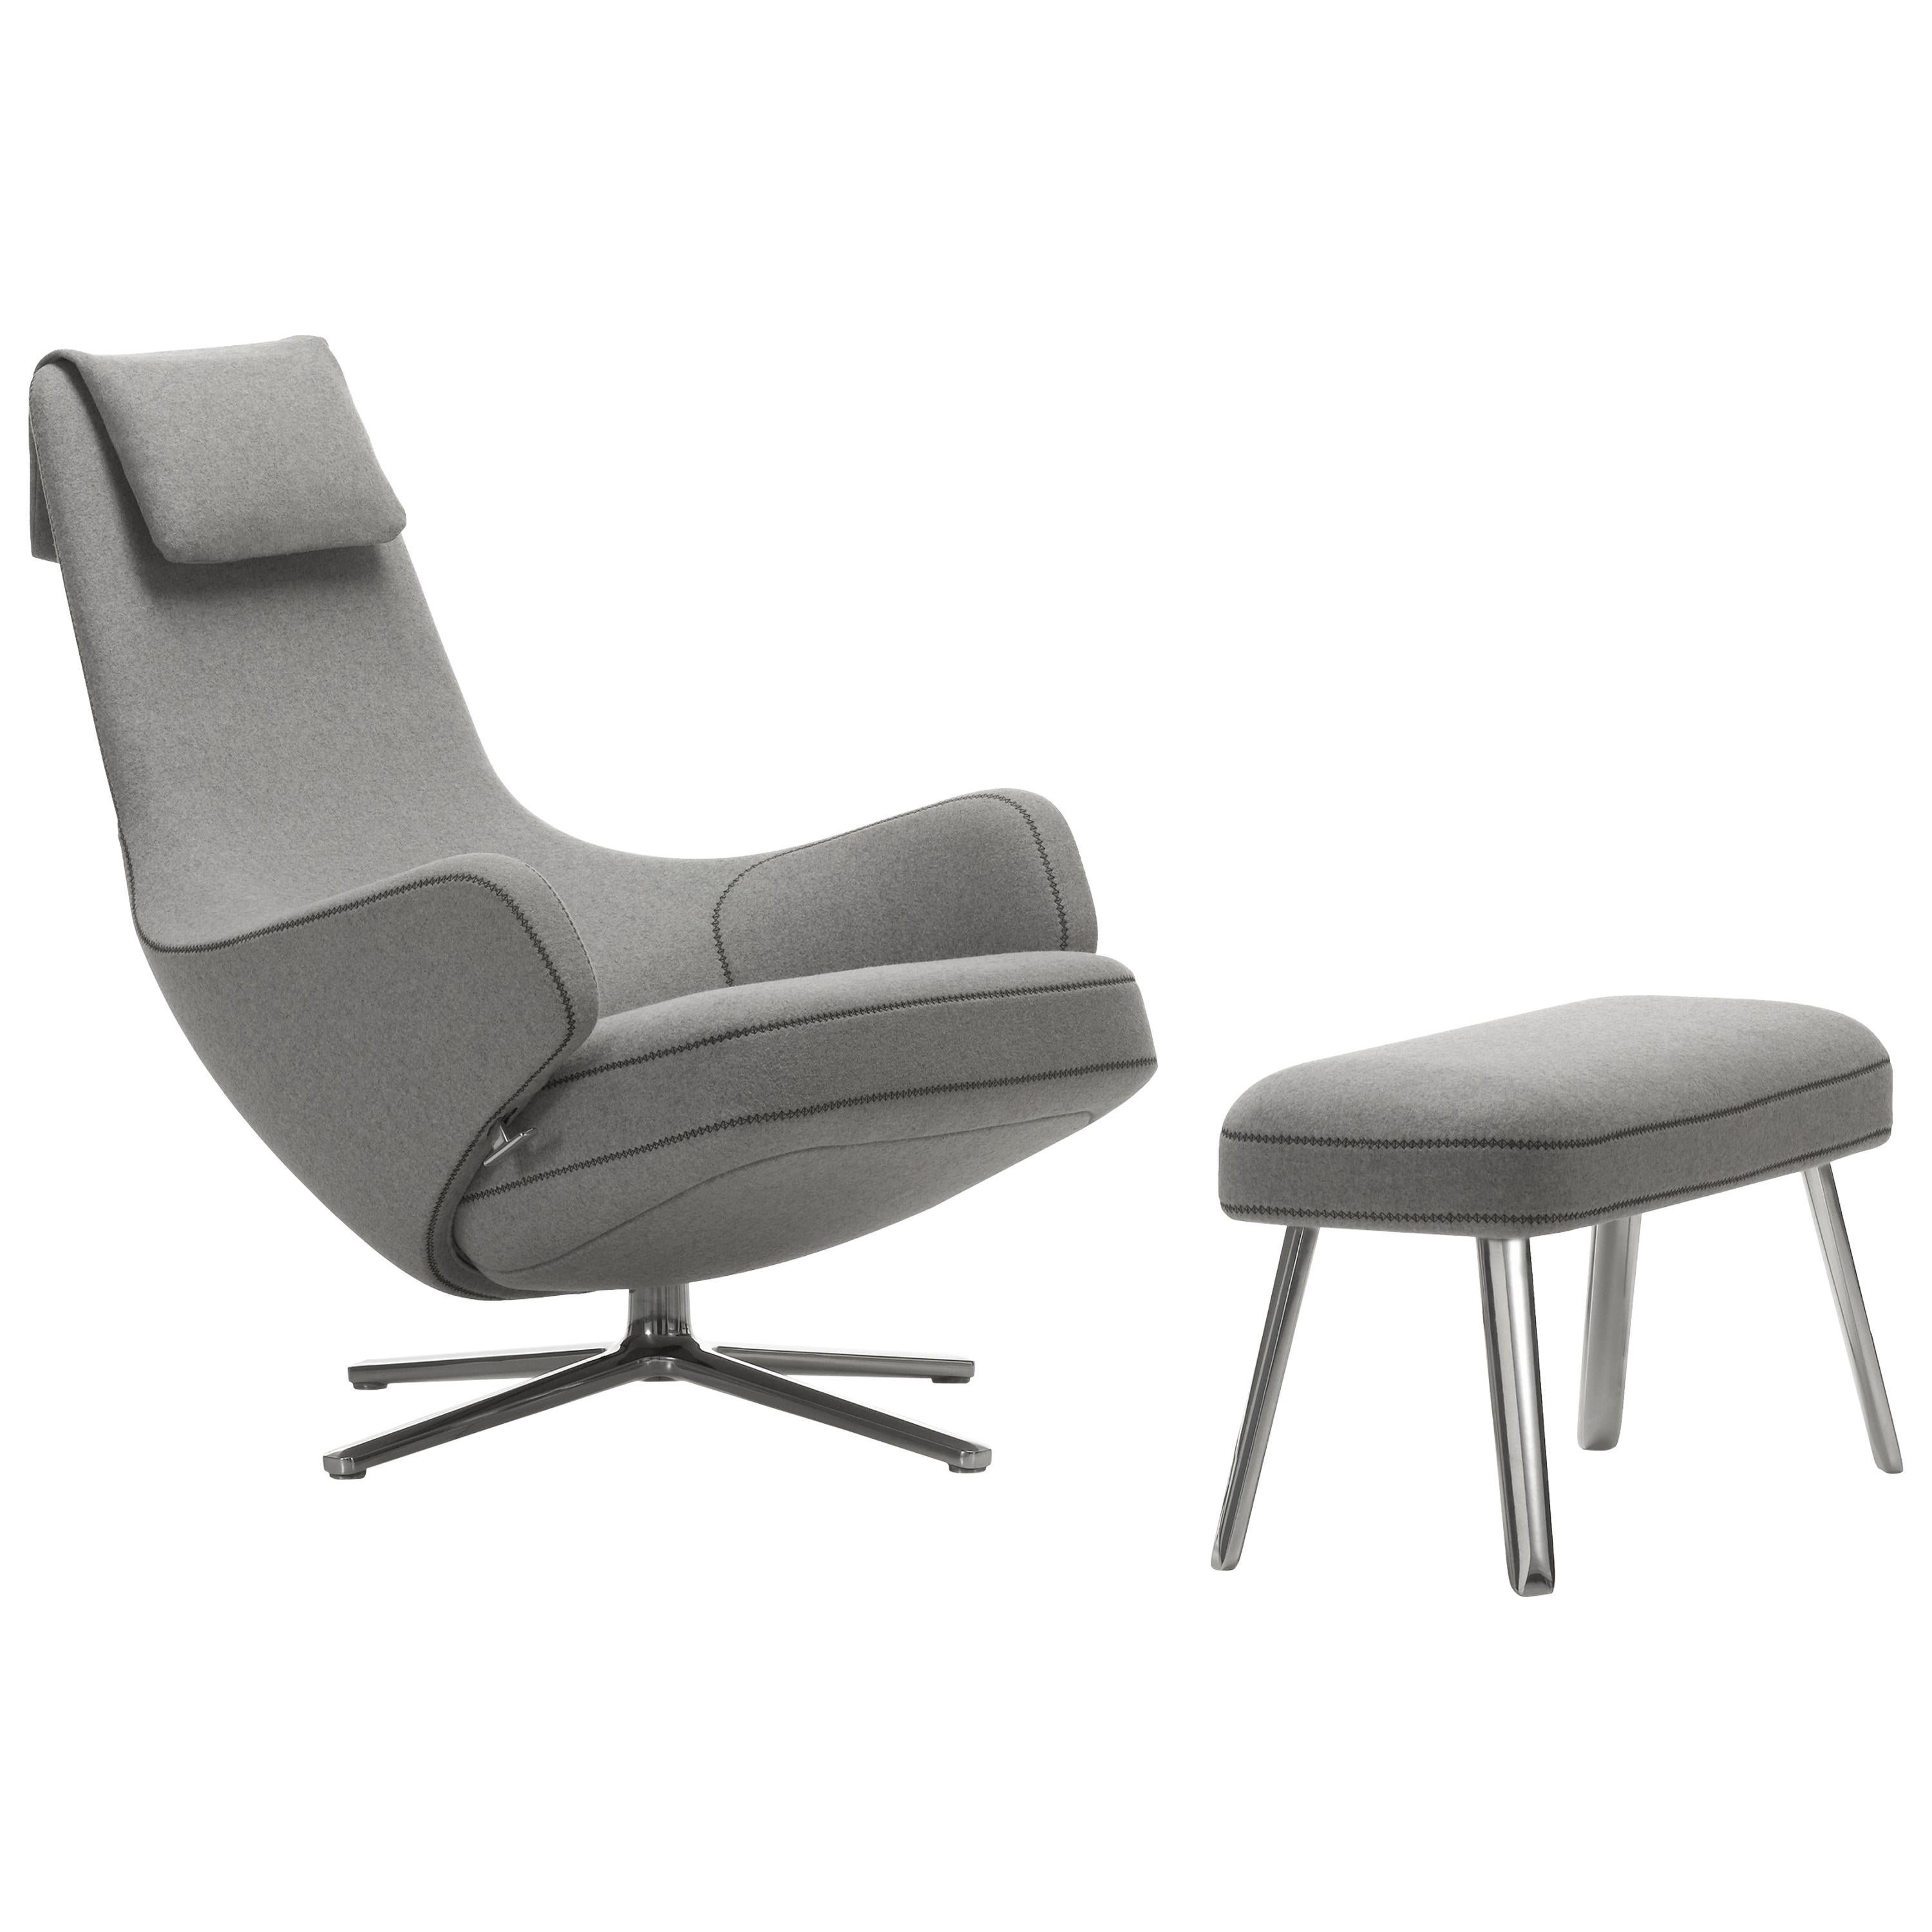 Vitra Repos & Panchina in Pebble Grey Cosy2 by Antonio Citterio For Sale